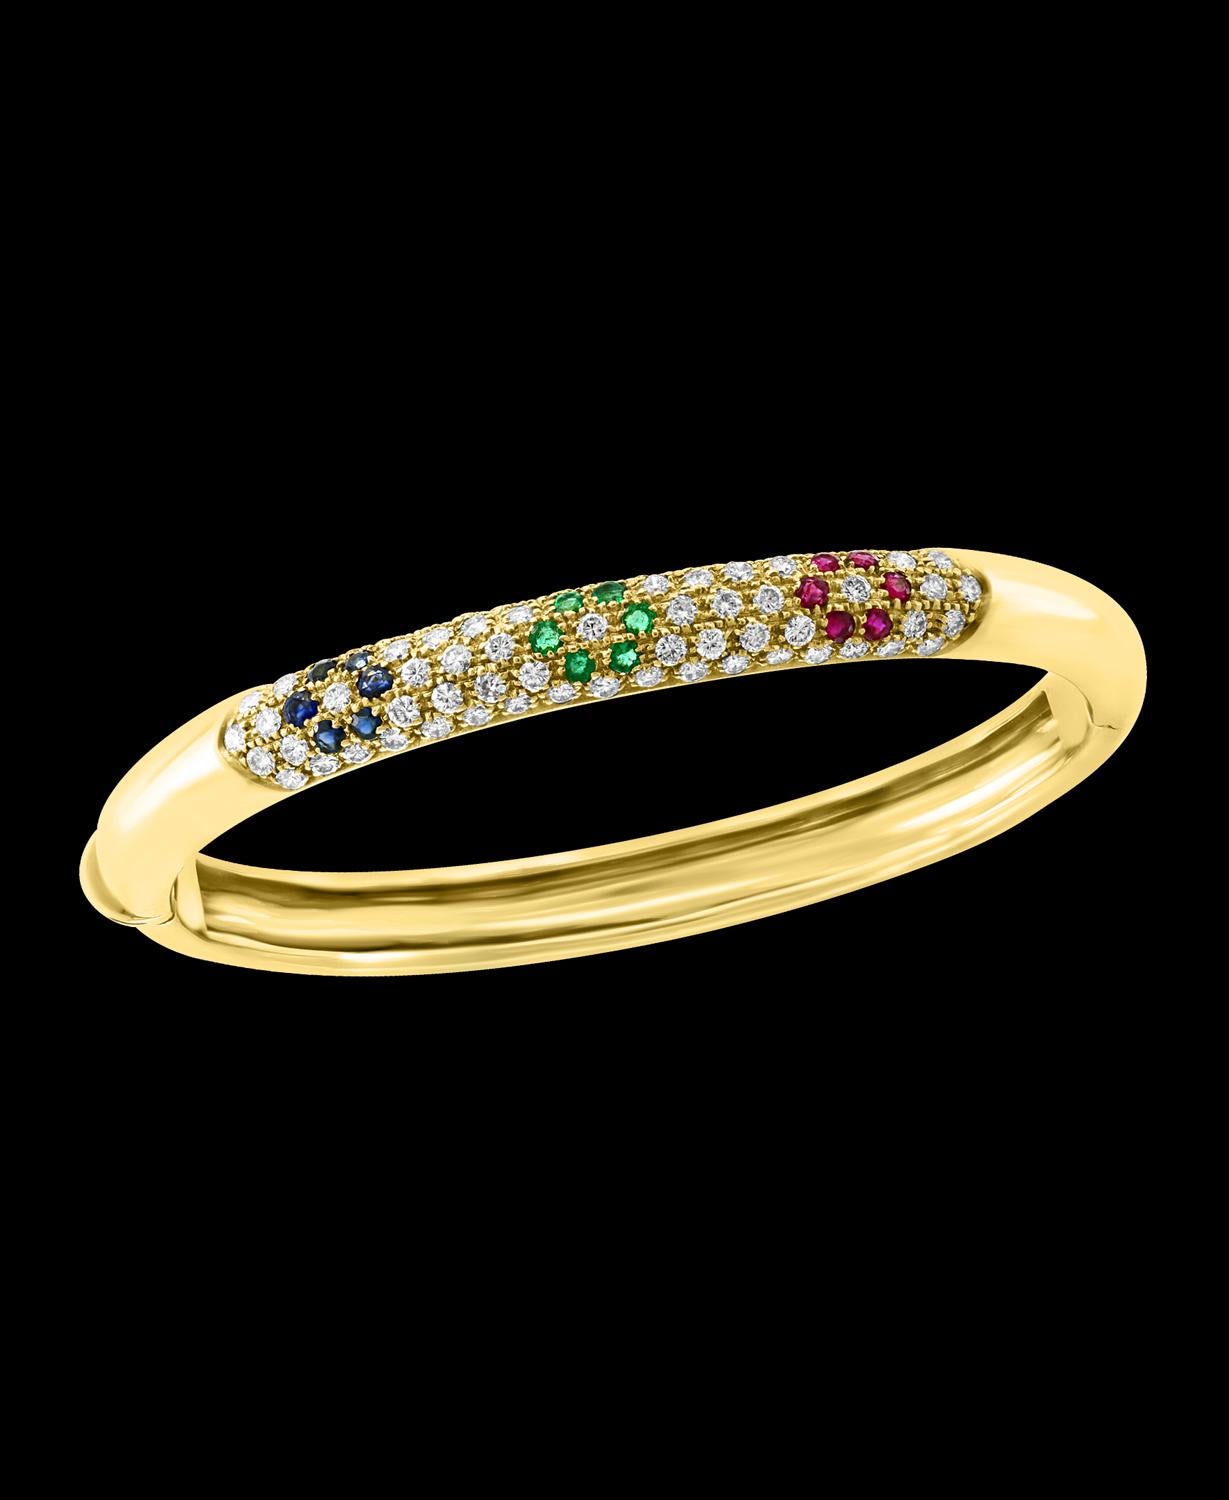 Round Cut Emerald Ruby Sapphire and Diamond Cuff Bangle Bracelet in 18 Karat Yellow Gold For Sale